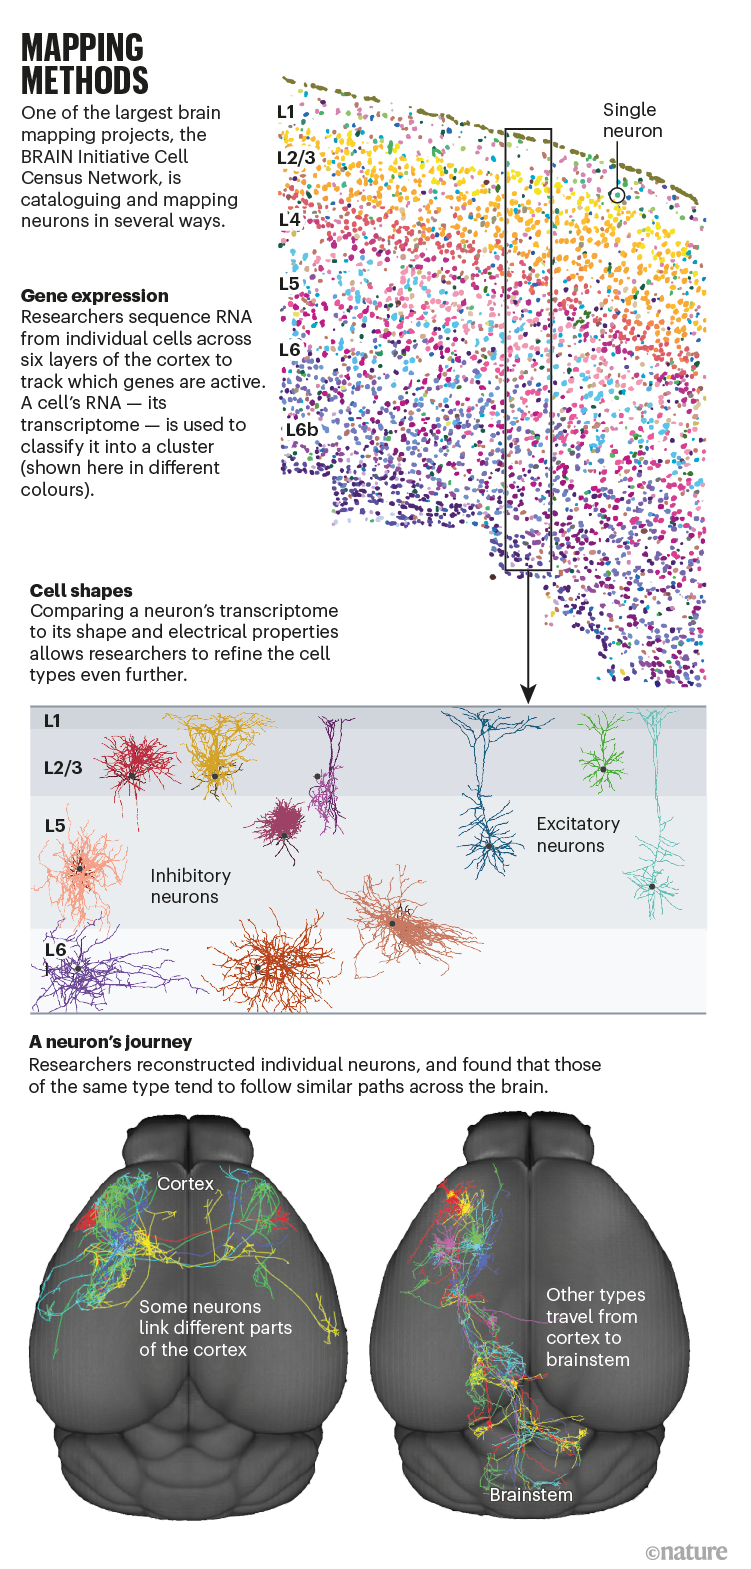 MAPPING METHODS: infographic showing how the BRAIN initiative Cell Census Network catalogues and maps neurons